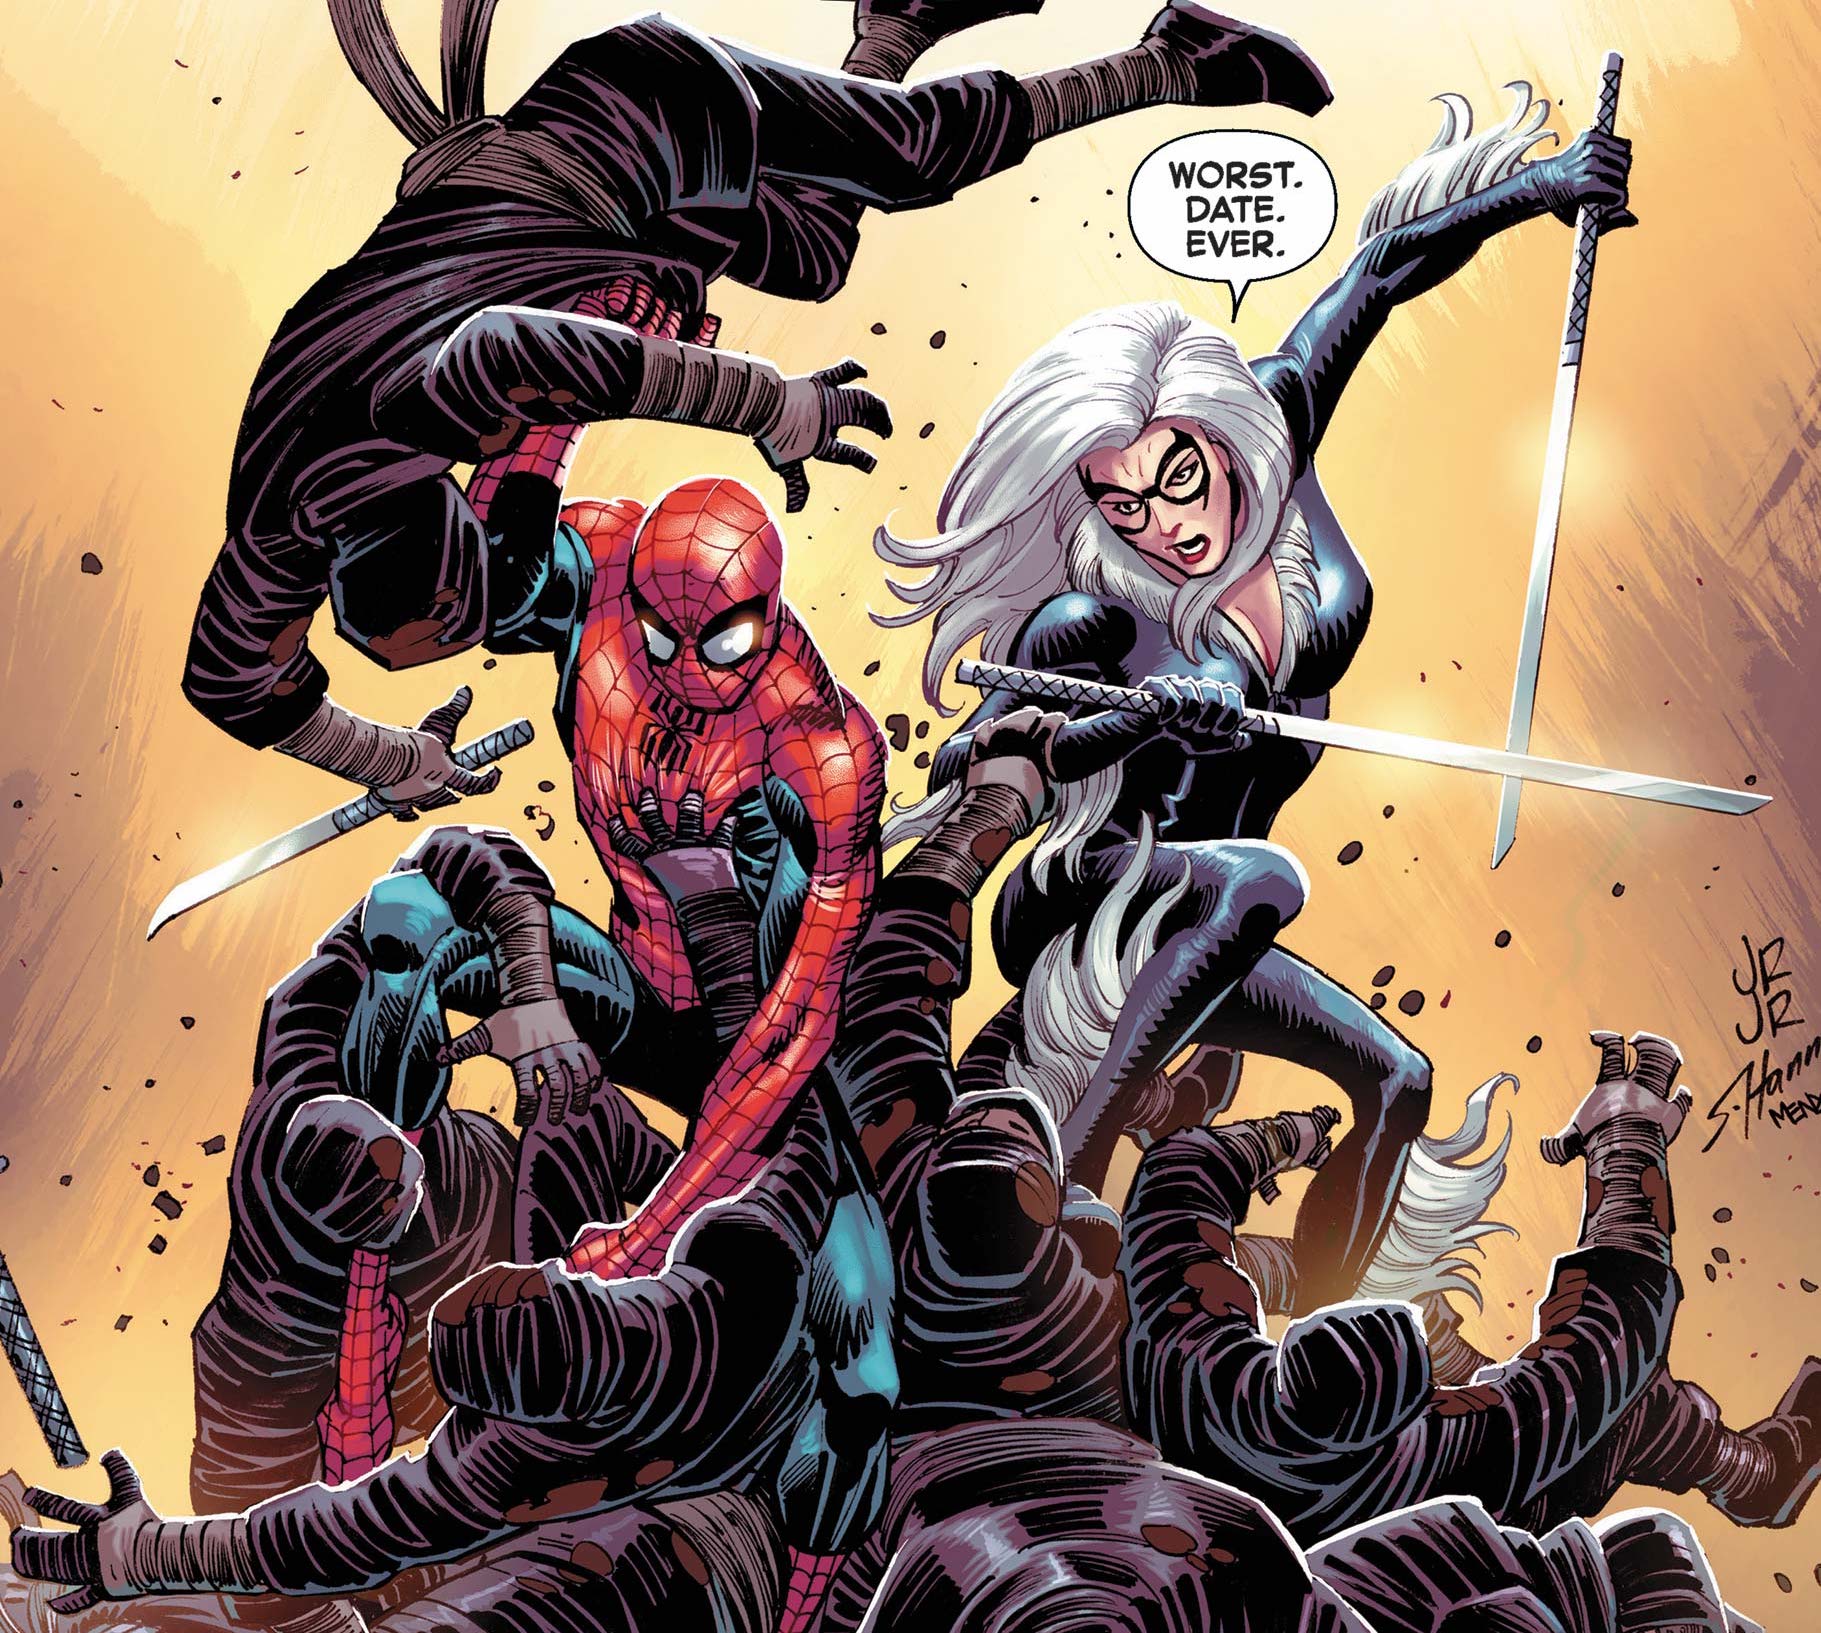 'Amazing Spider-Man' #19 (LGY #913) sends Spidey and Black Cat to the spa